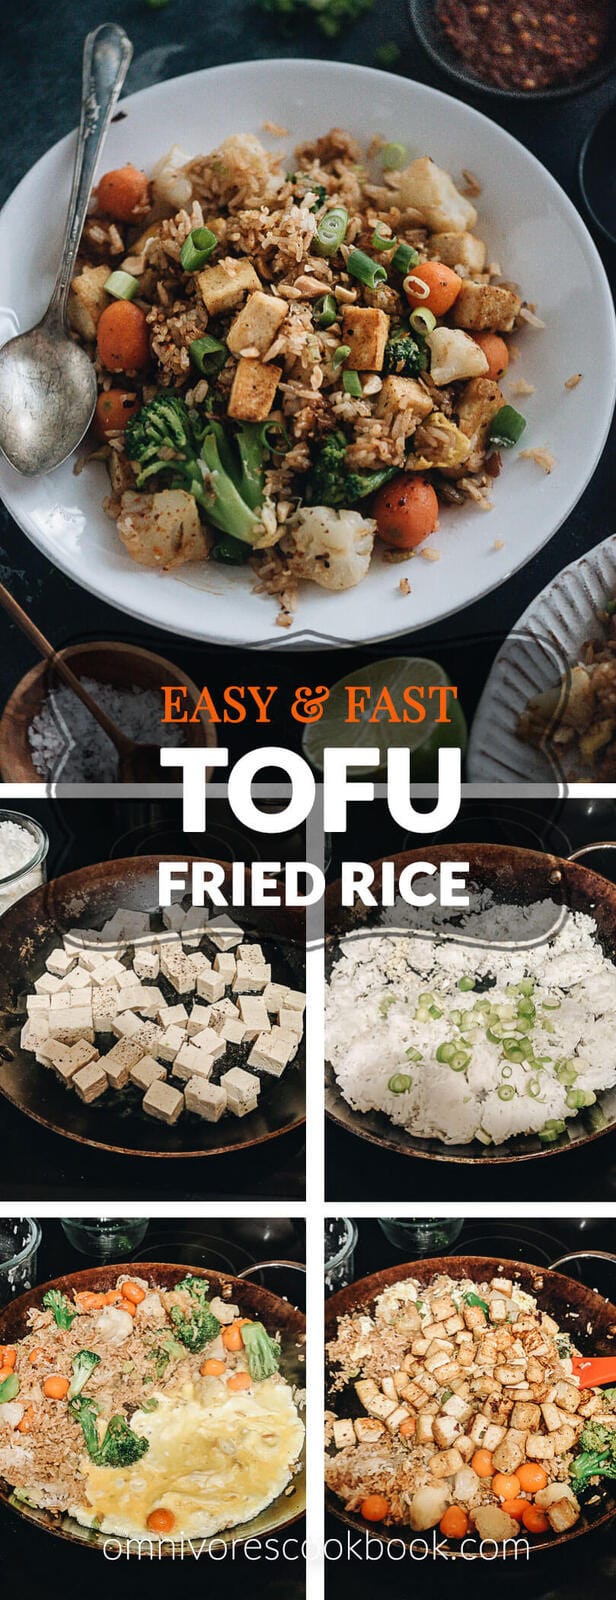 Easy tofu fried rice - A healthy and delicious one-pot meal that you can whip up in 20 minutes. The charred rice is bursting with flavor and loaded with vegetables and lean protein. {Vegetarian, Gluten-free adaptable} #healthy #withegg #vegetable #recipe